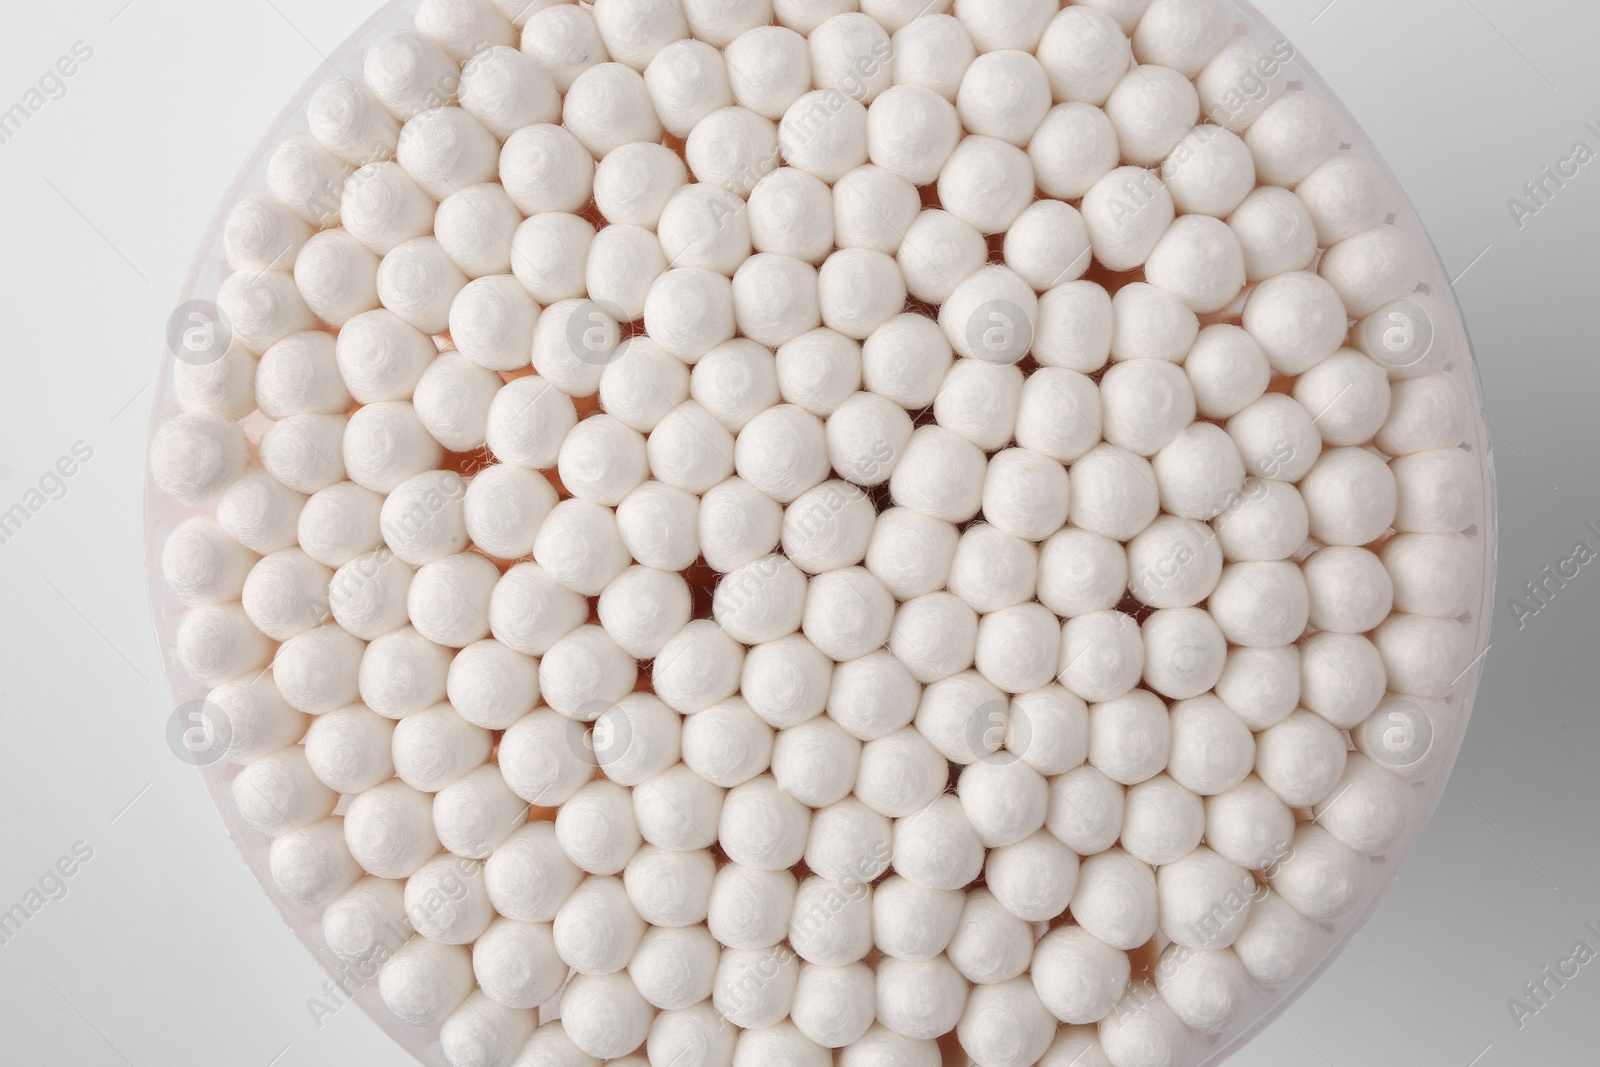 Photo of Open container with cotton buds on white background, top view